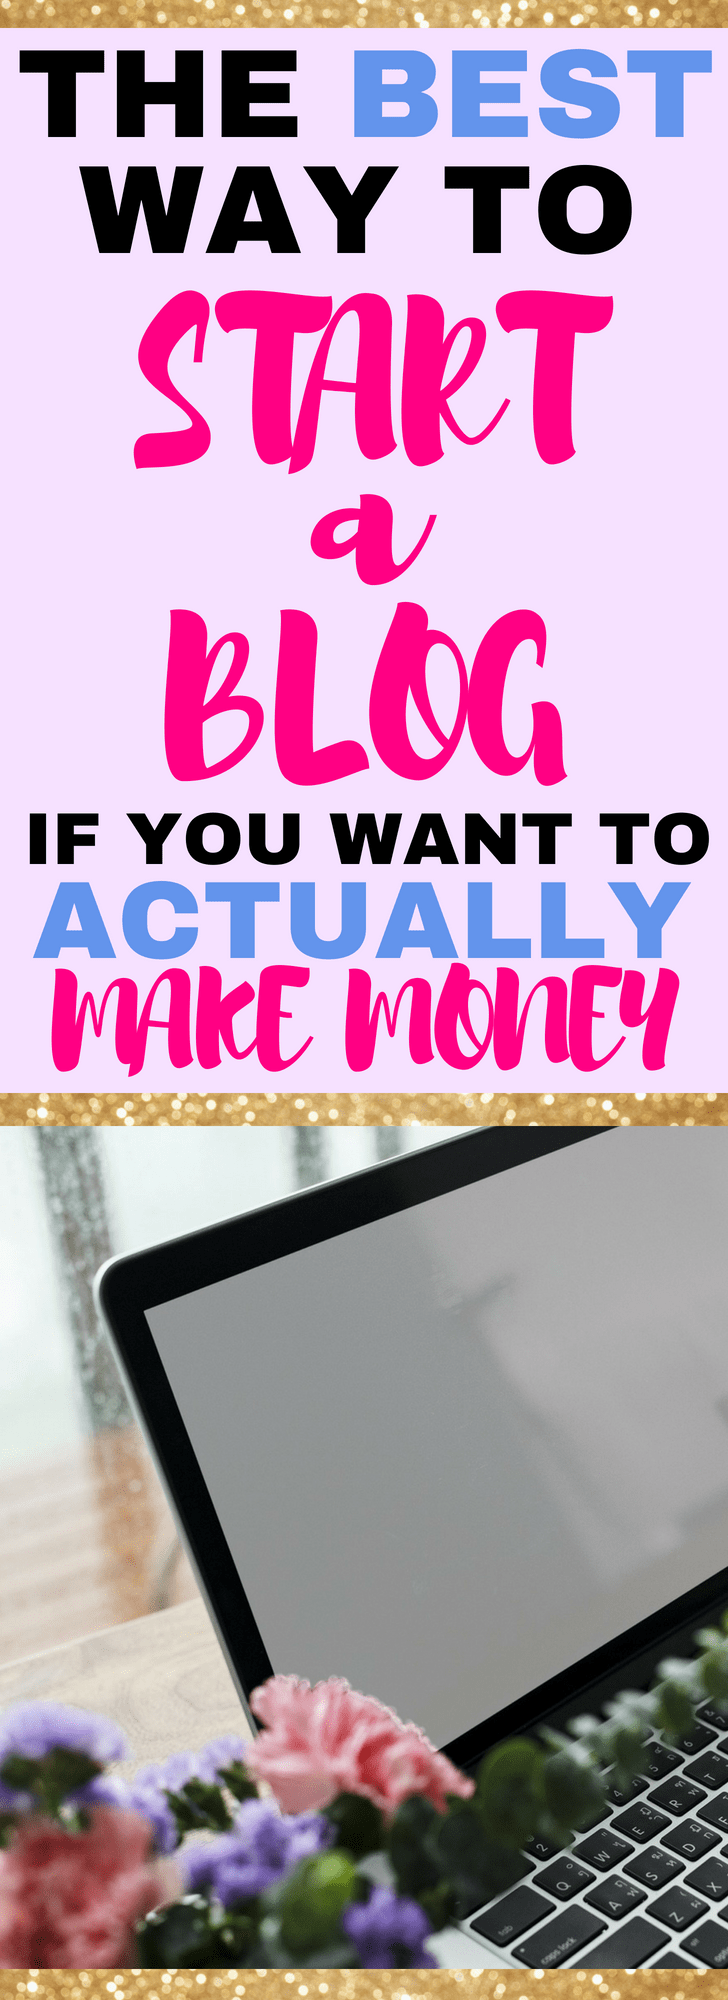 the best way to start a blog if you want to actually make money #blogging #blog #howto #howtoblog #howtostartablog #blogging #blogformoney #makemoney